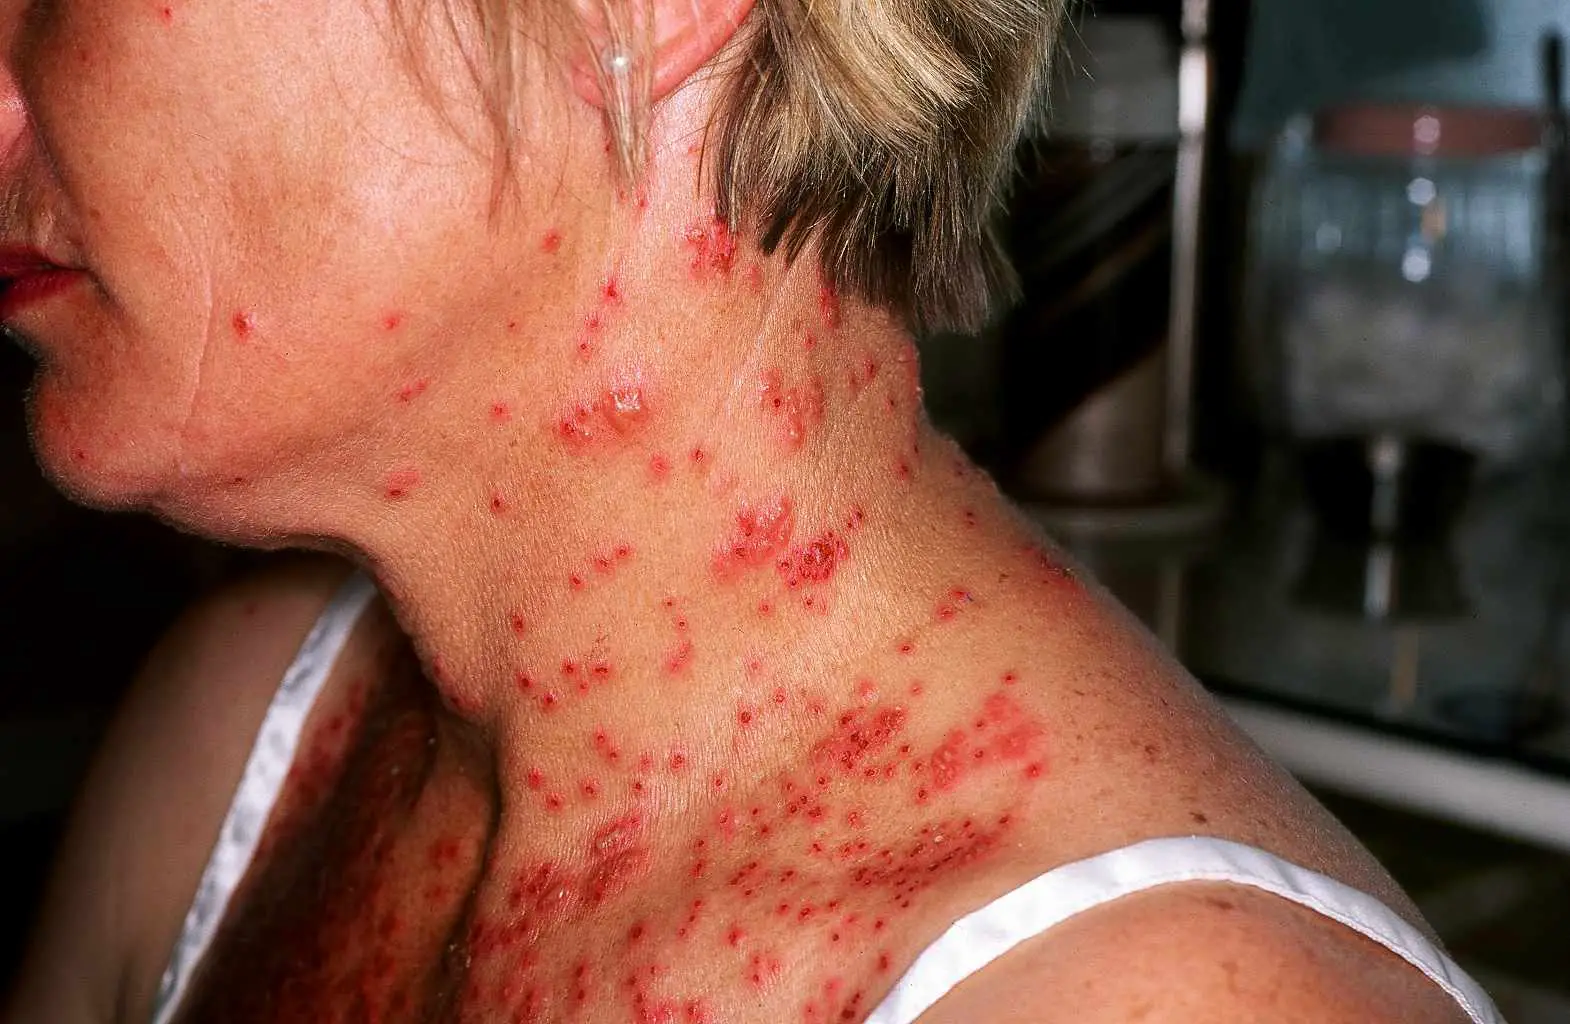 Eczema (Atopic Dermatitis): Overview and More